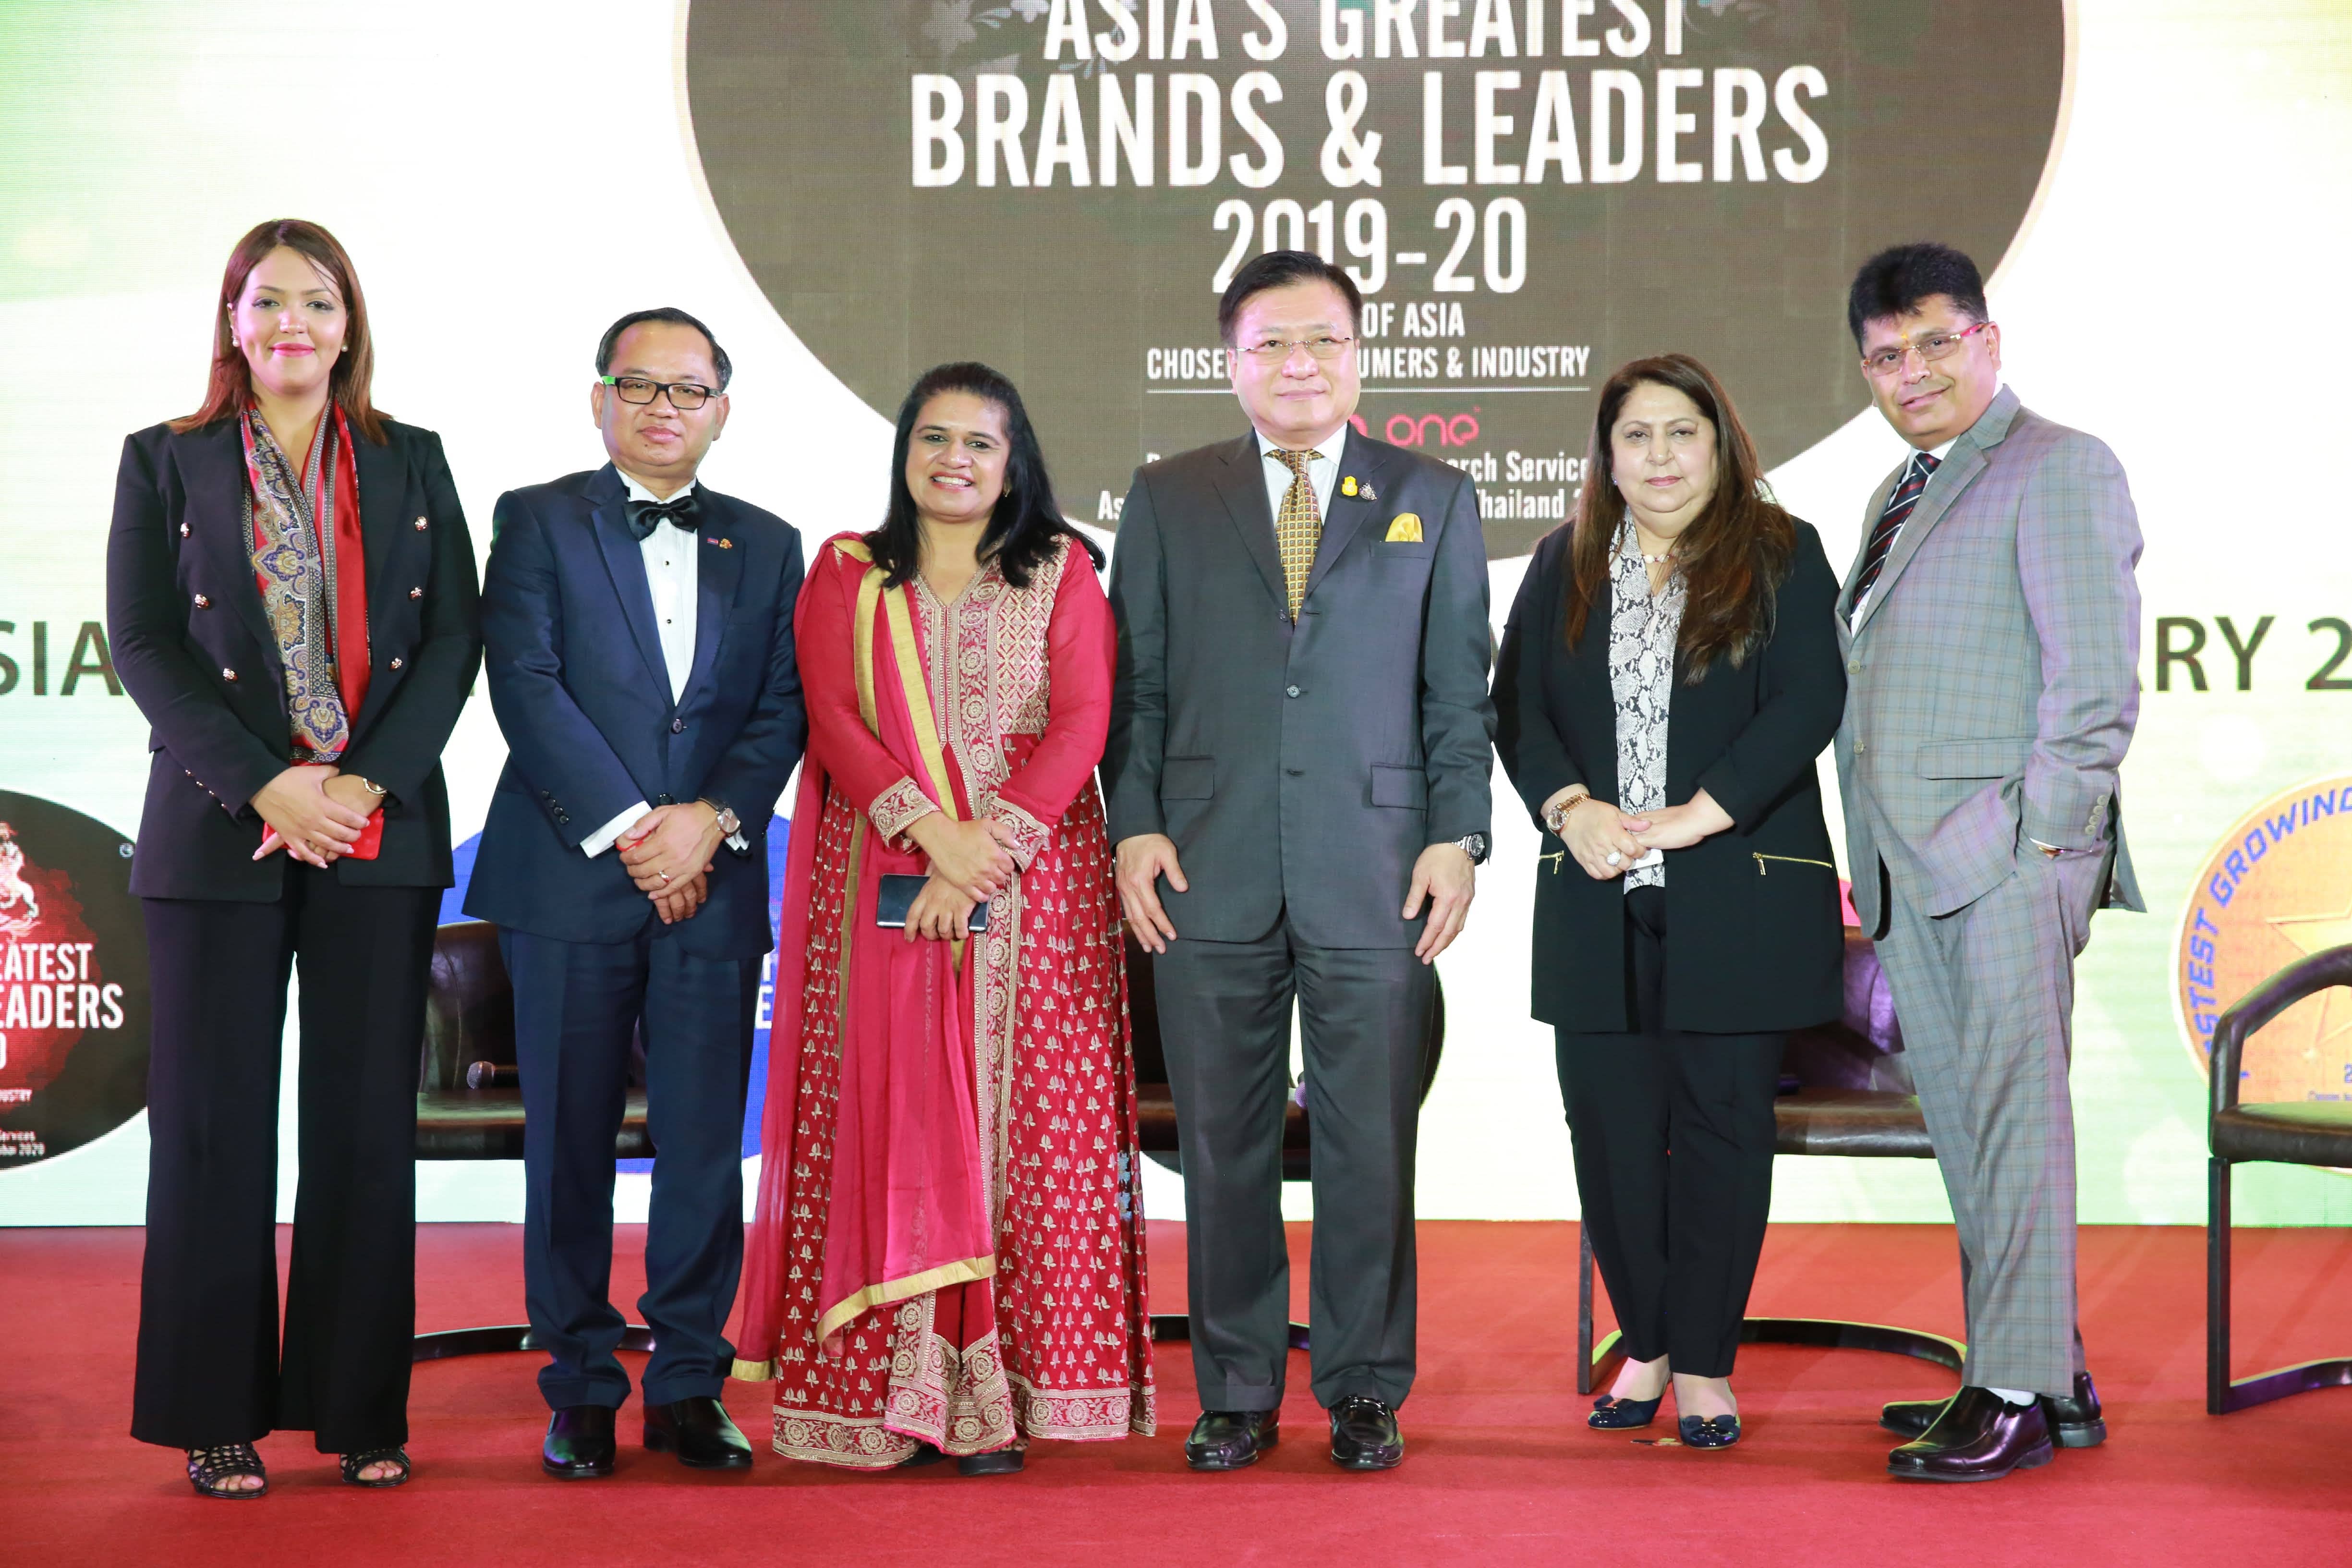 Asia's Greatest CSR and Brand Leaders of 2019-2020 @Bangkok - 07.02.2020